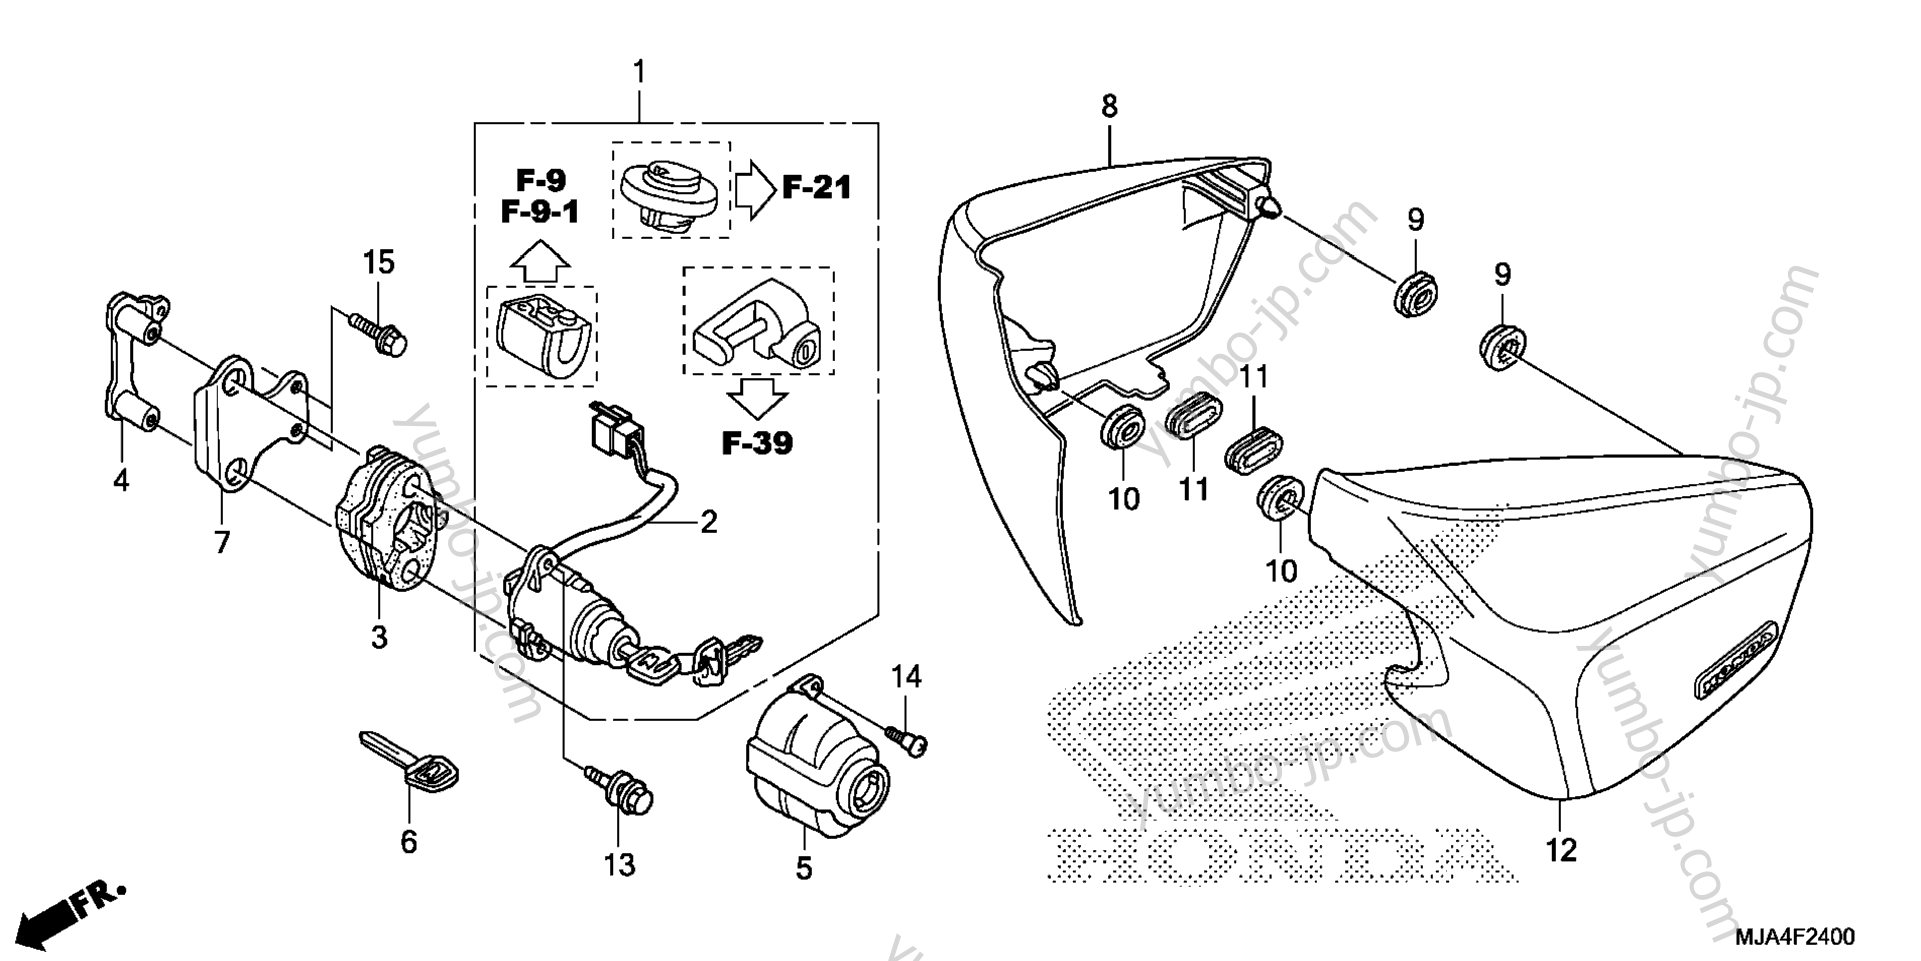 SIDE COVER (1) for motorcycles HONDA VT750CA AC 2012 year